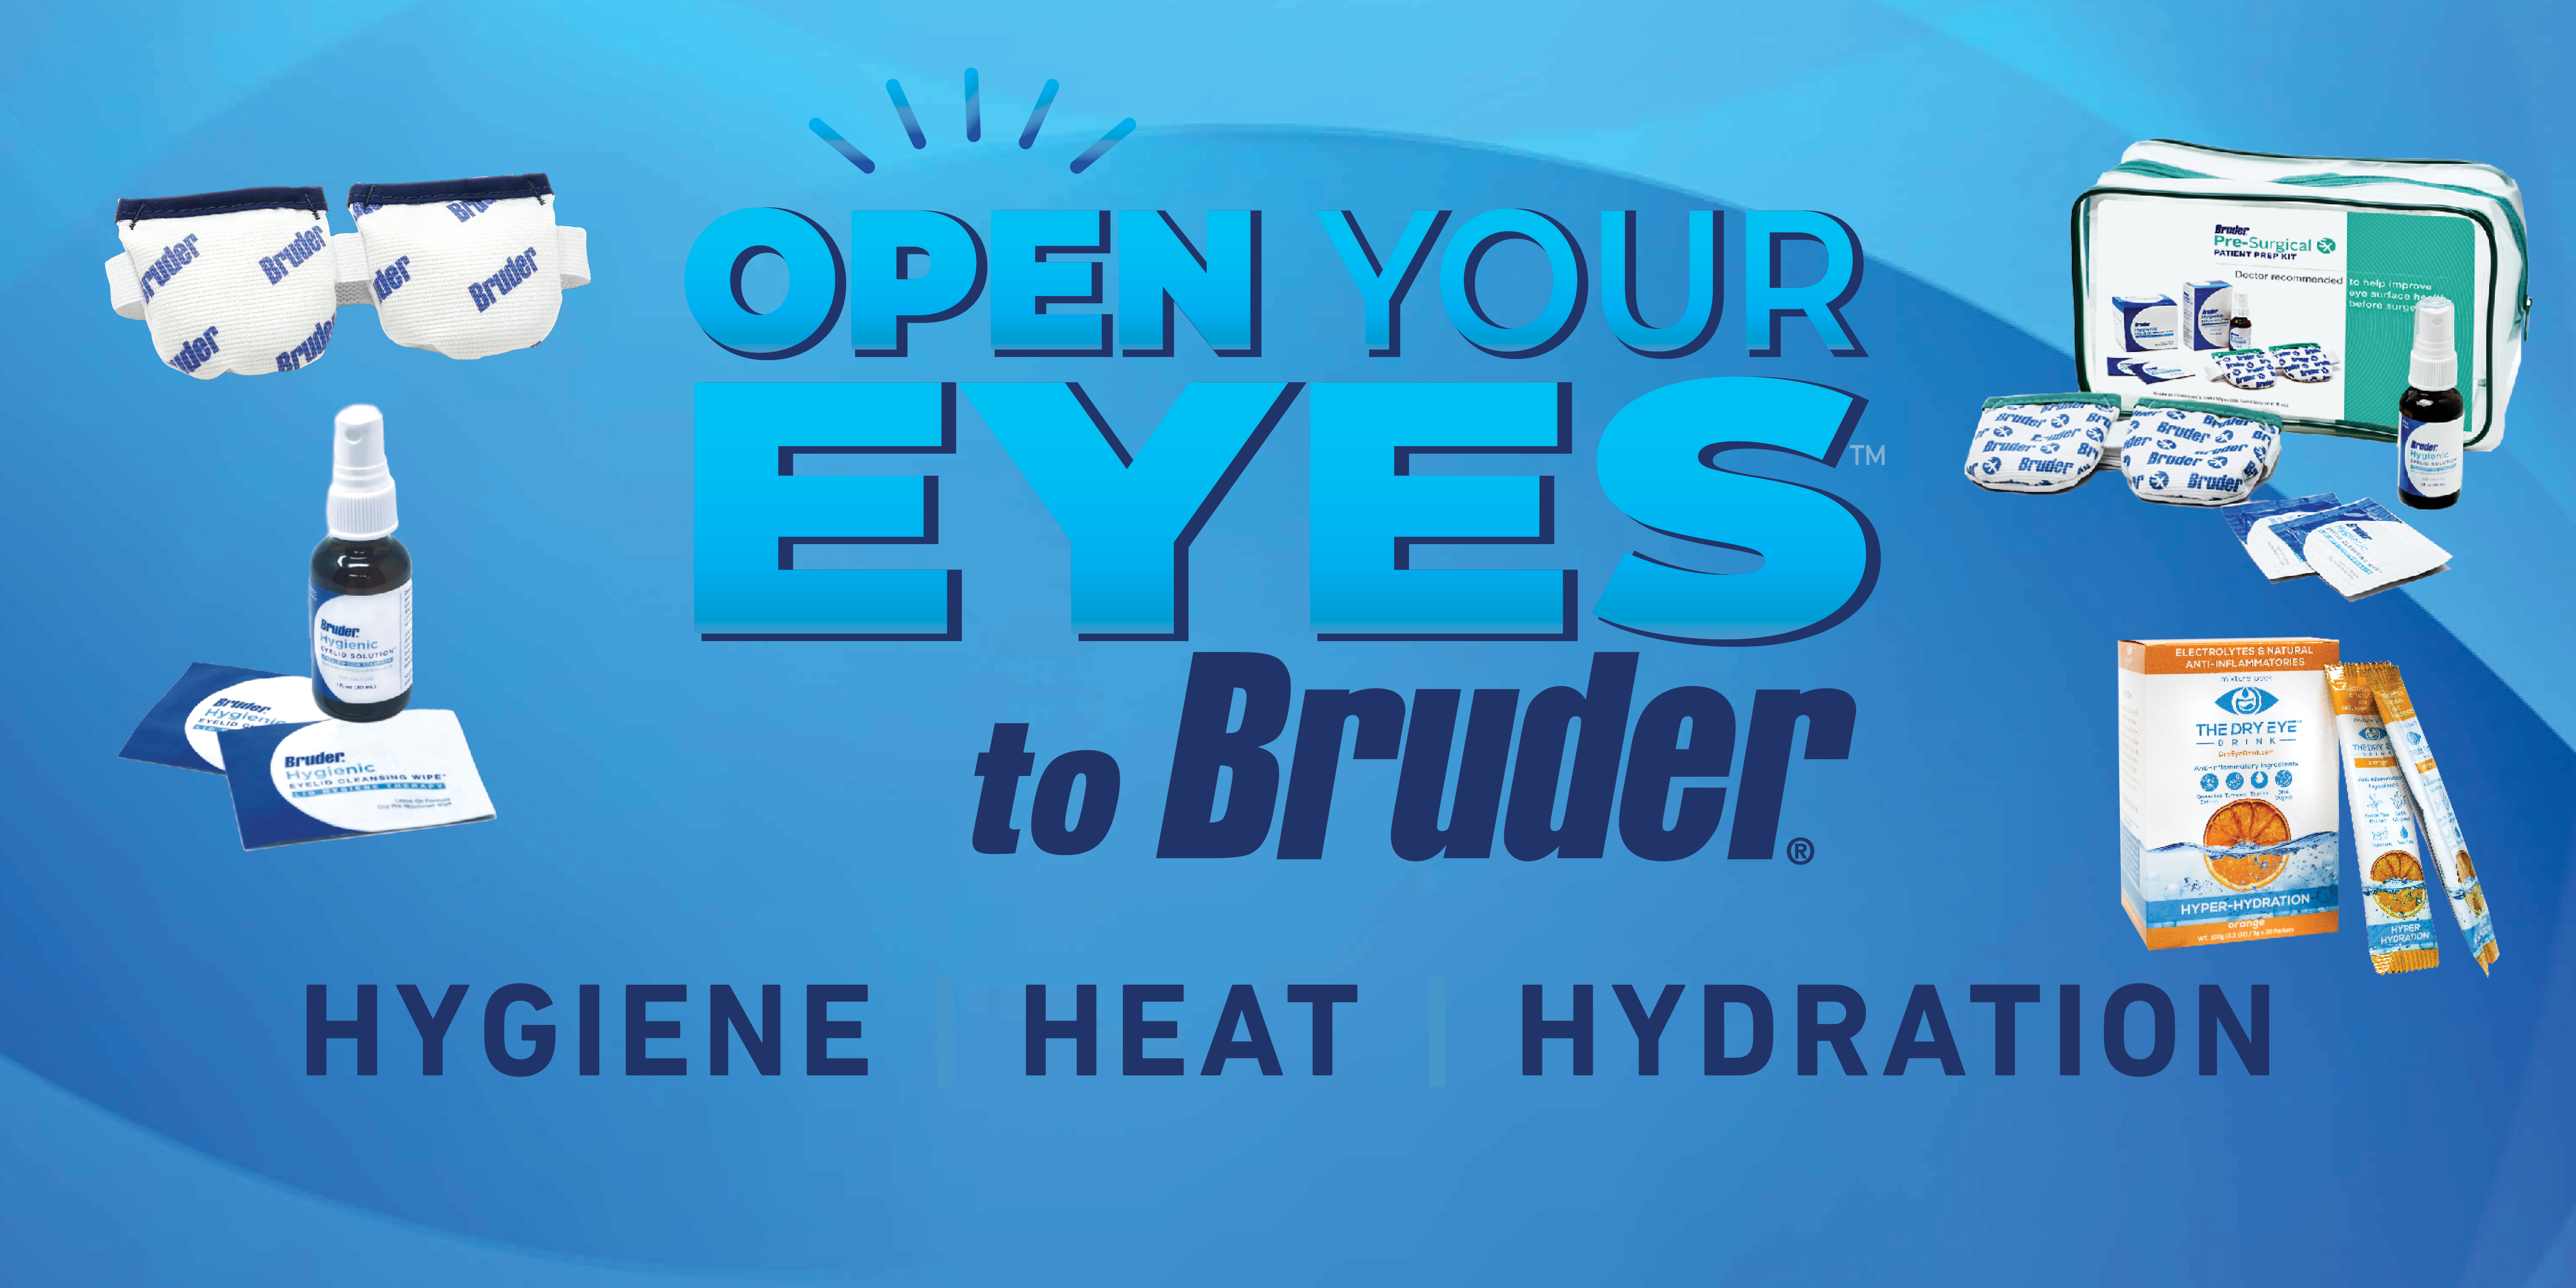 Open Your Eyes to Bruder